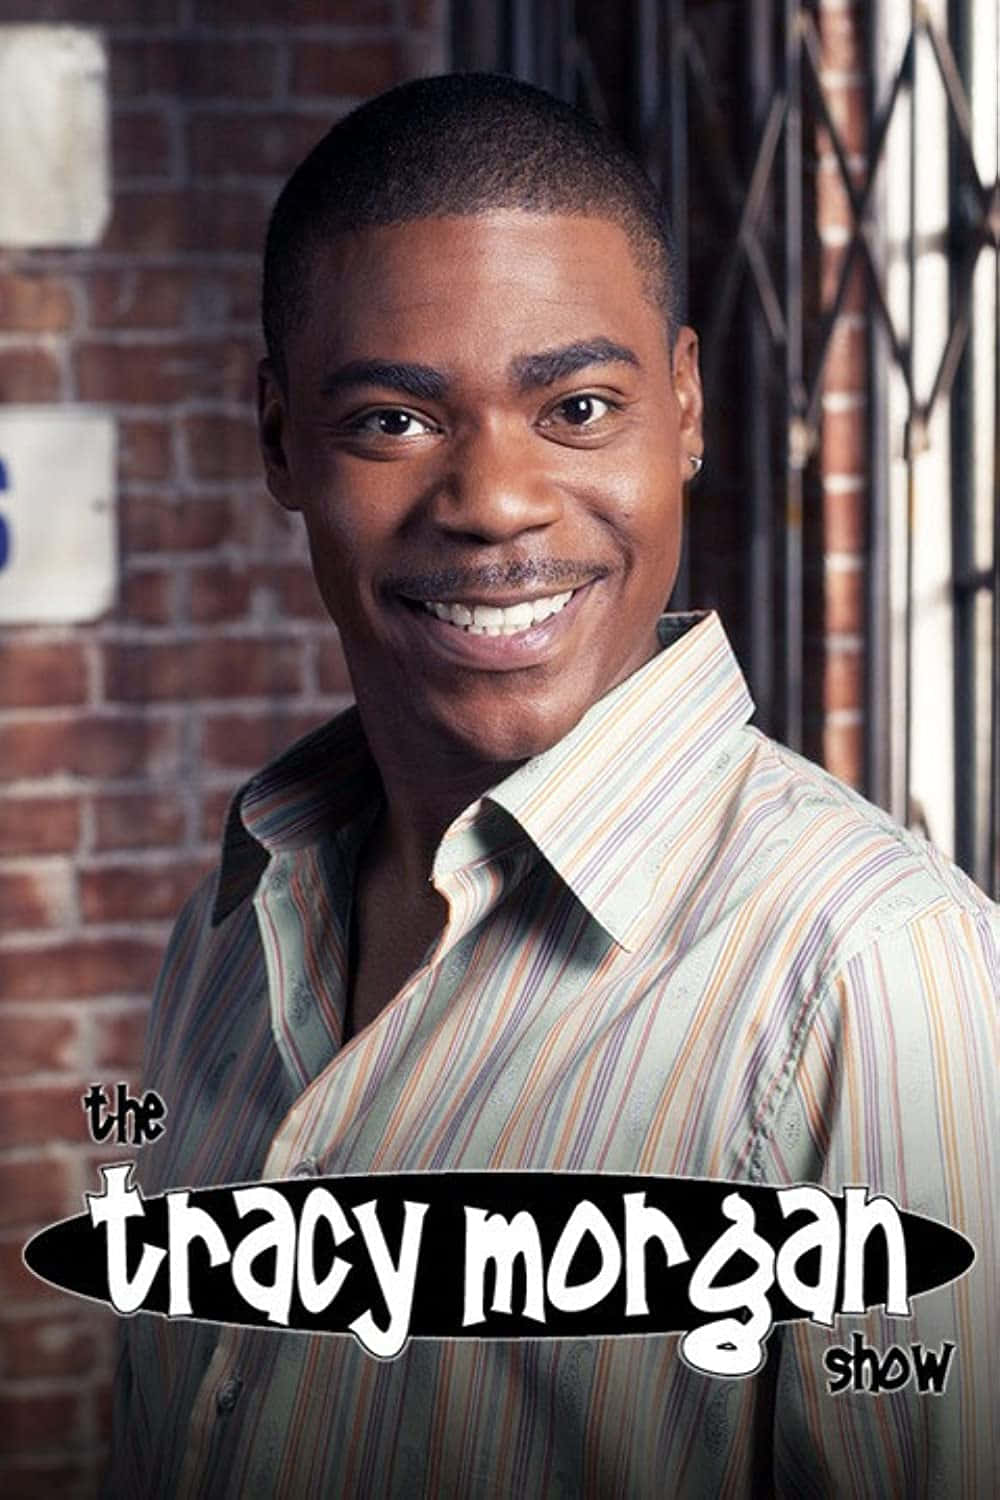 Actor and comedian Tracy Morgan posing in a charming portrait Wallpaper